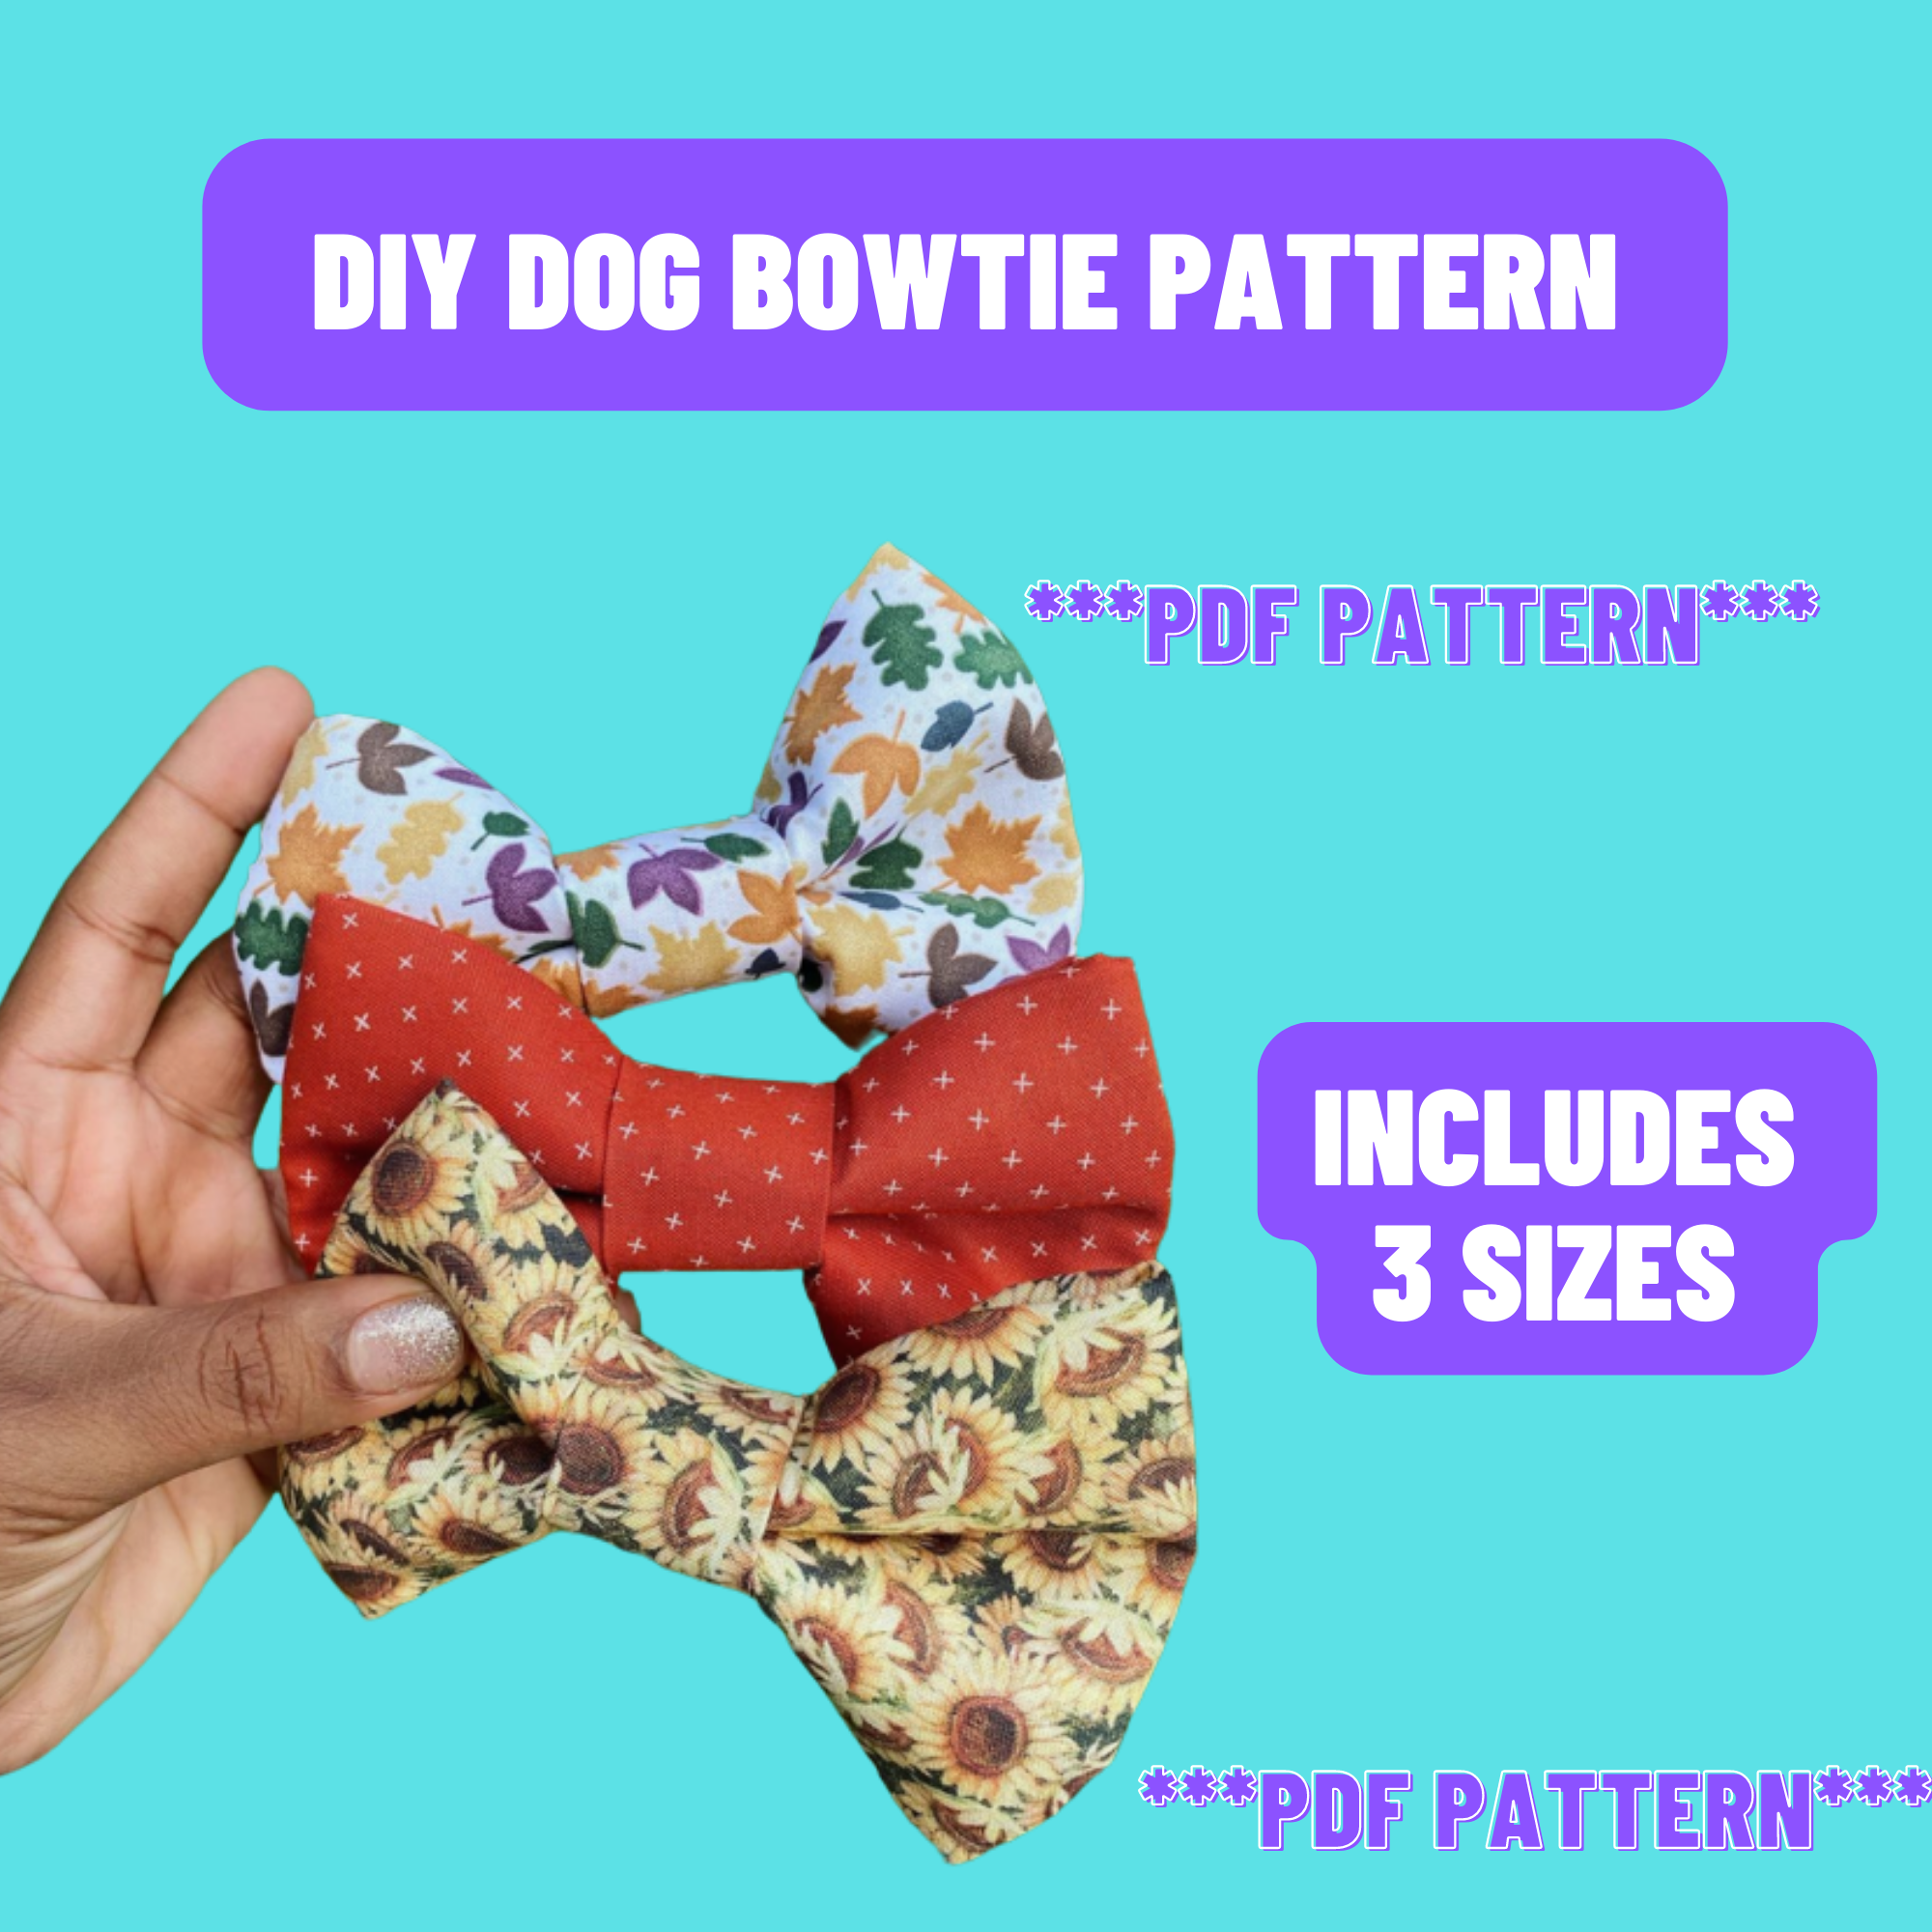 dog-bowtie-pattern-with-elastic-digital-dog-bow-tie-pattern-with